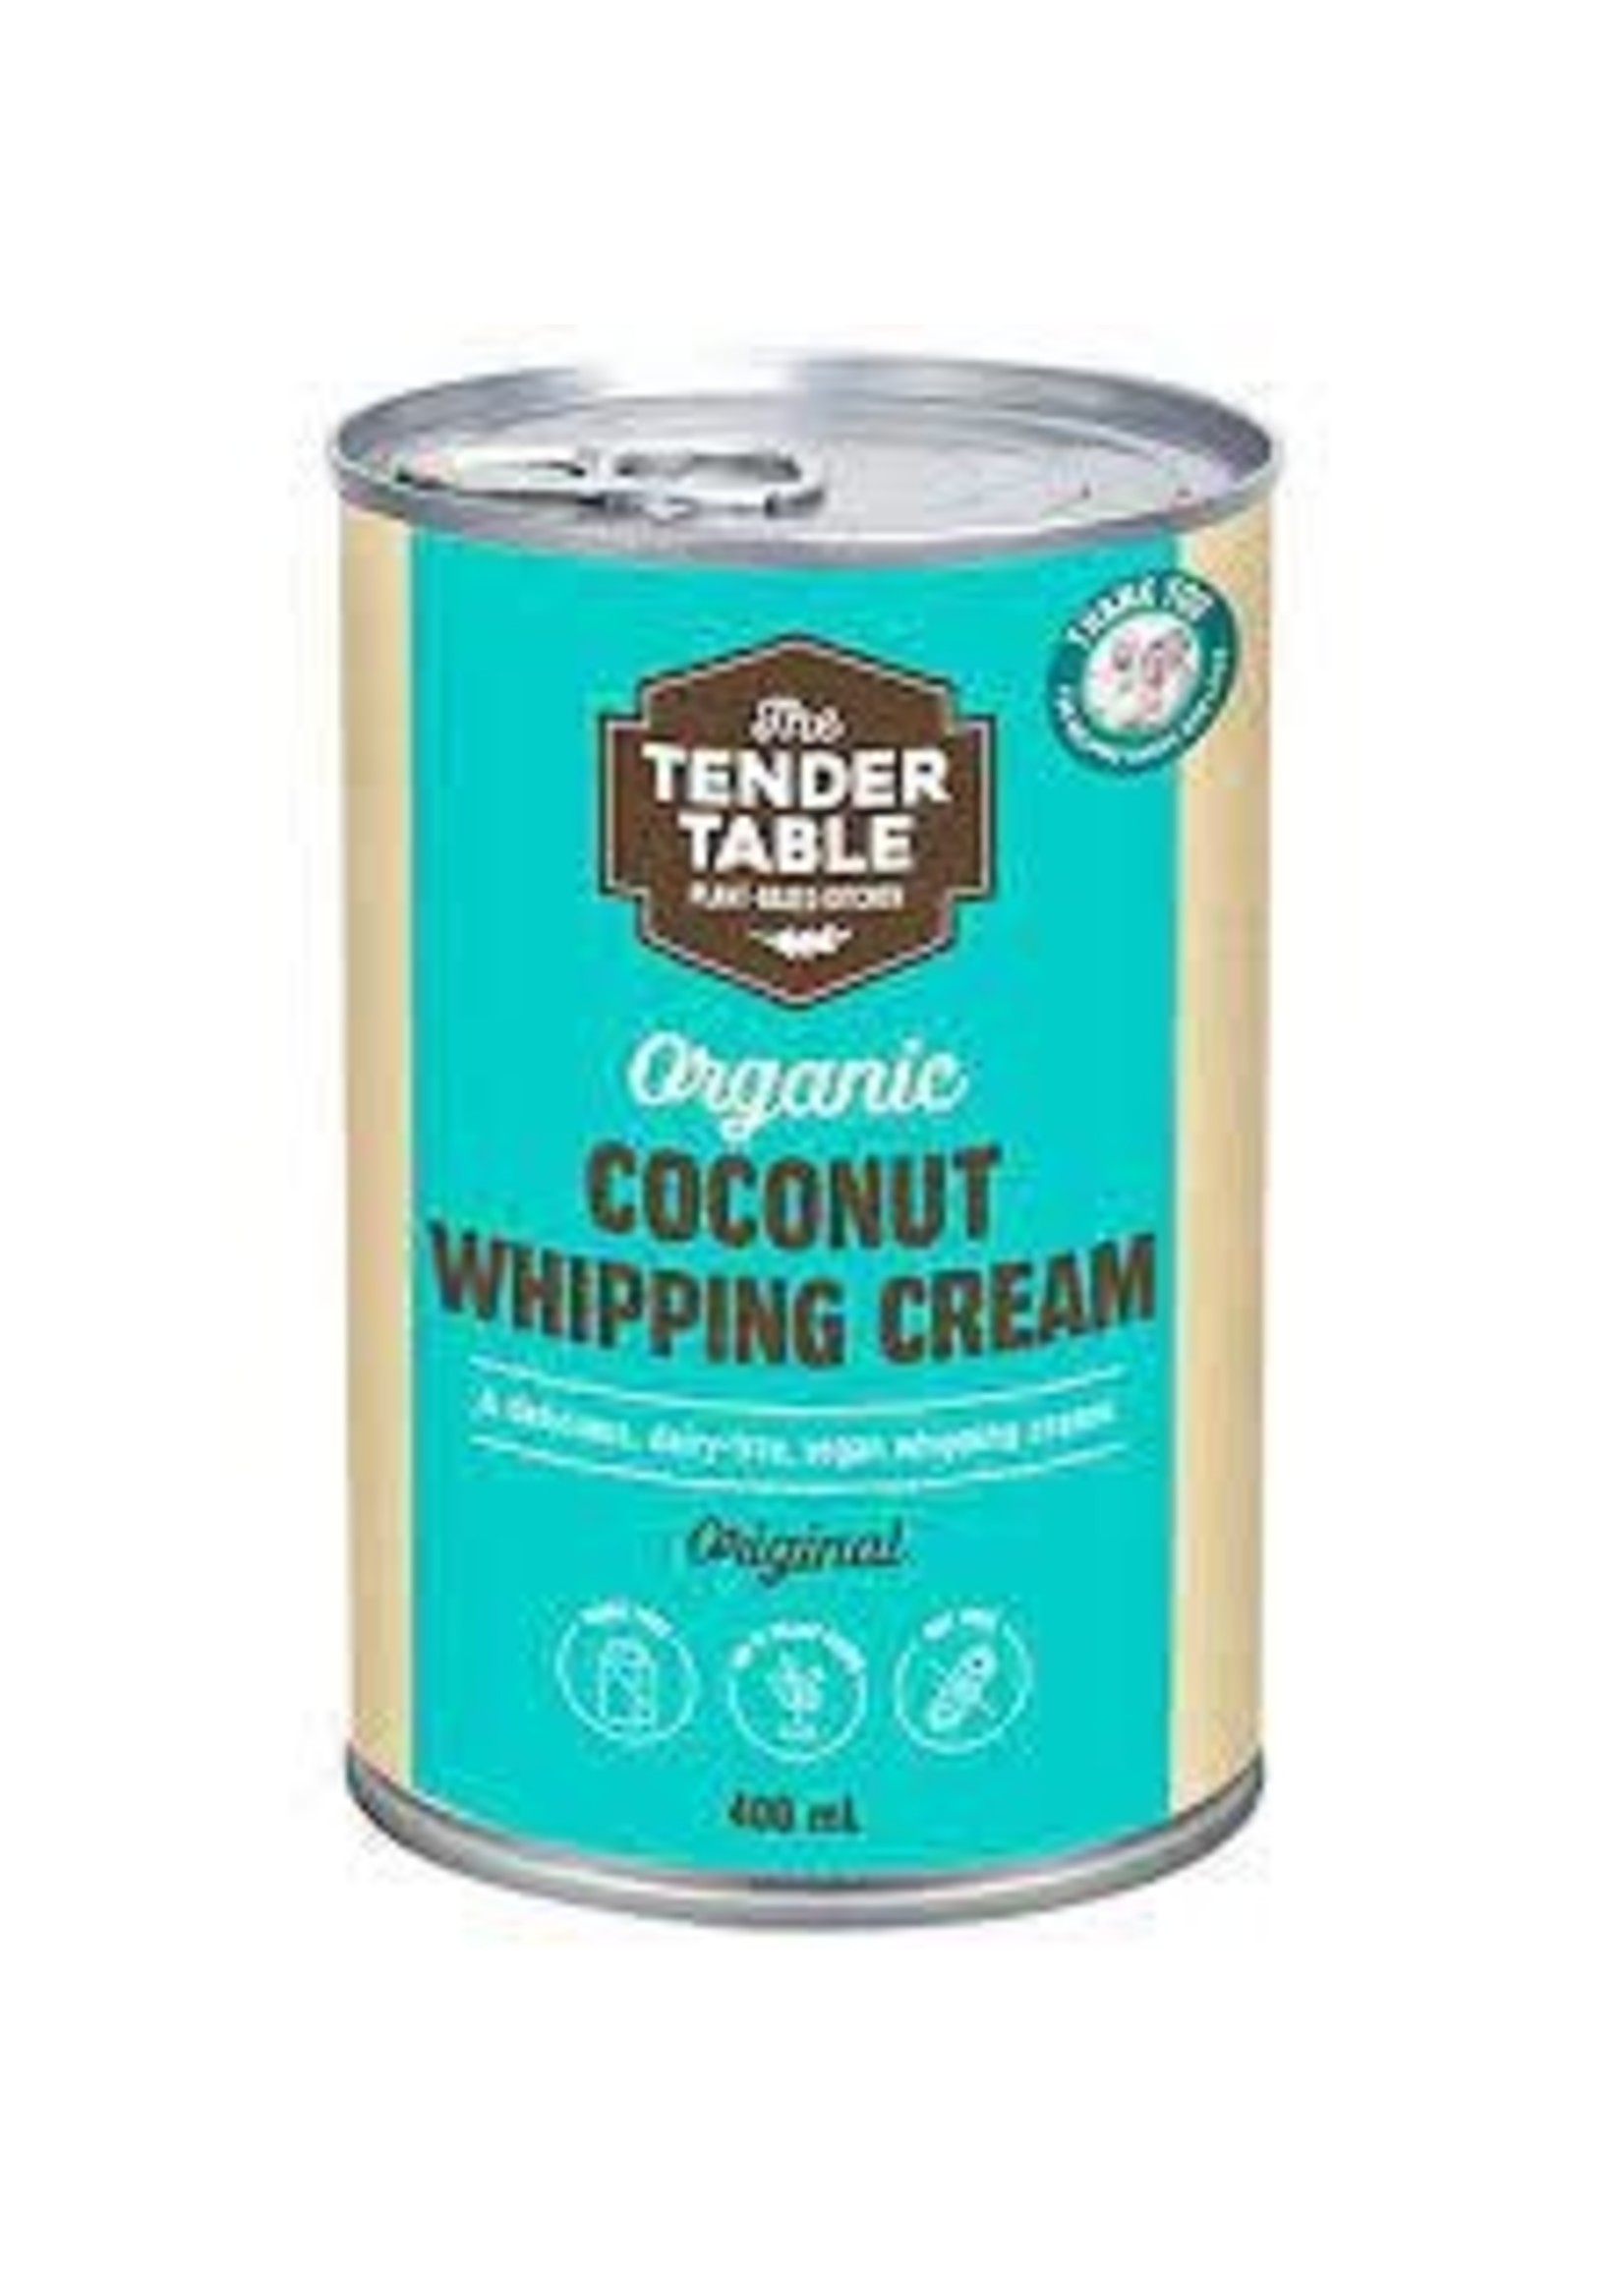 The tender table The Tender Table  Organic Coconut Whipping Cream Original 400ml